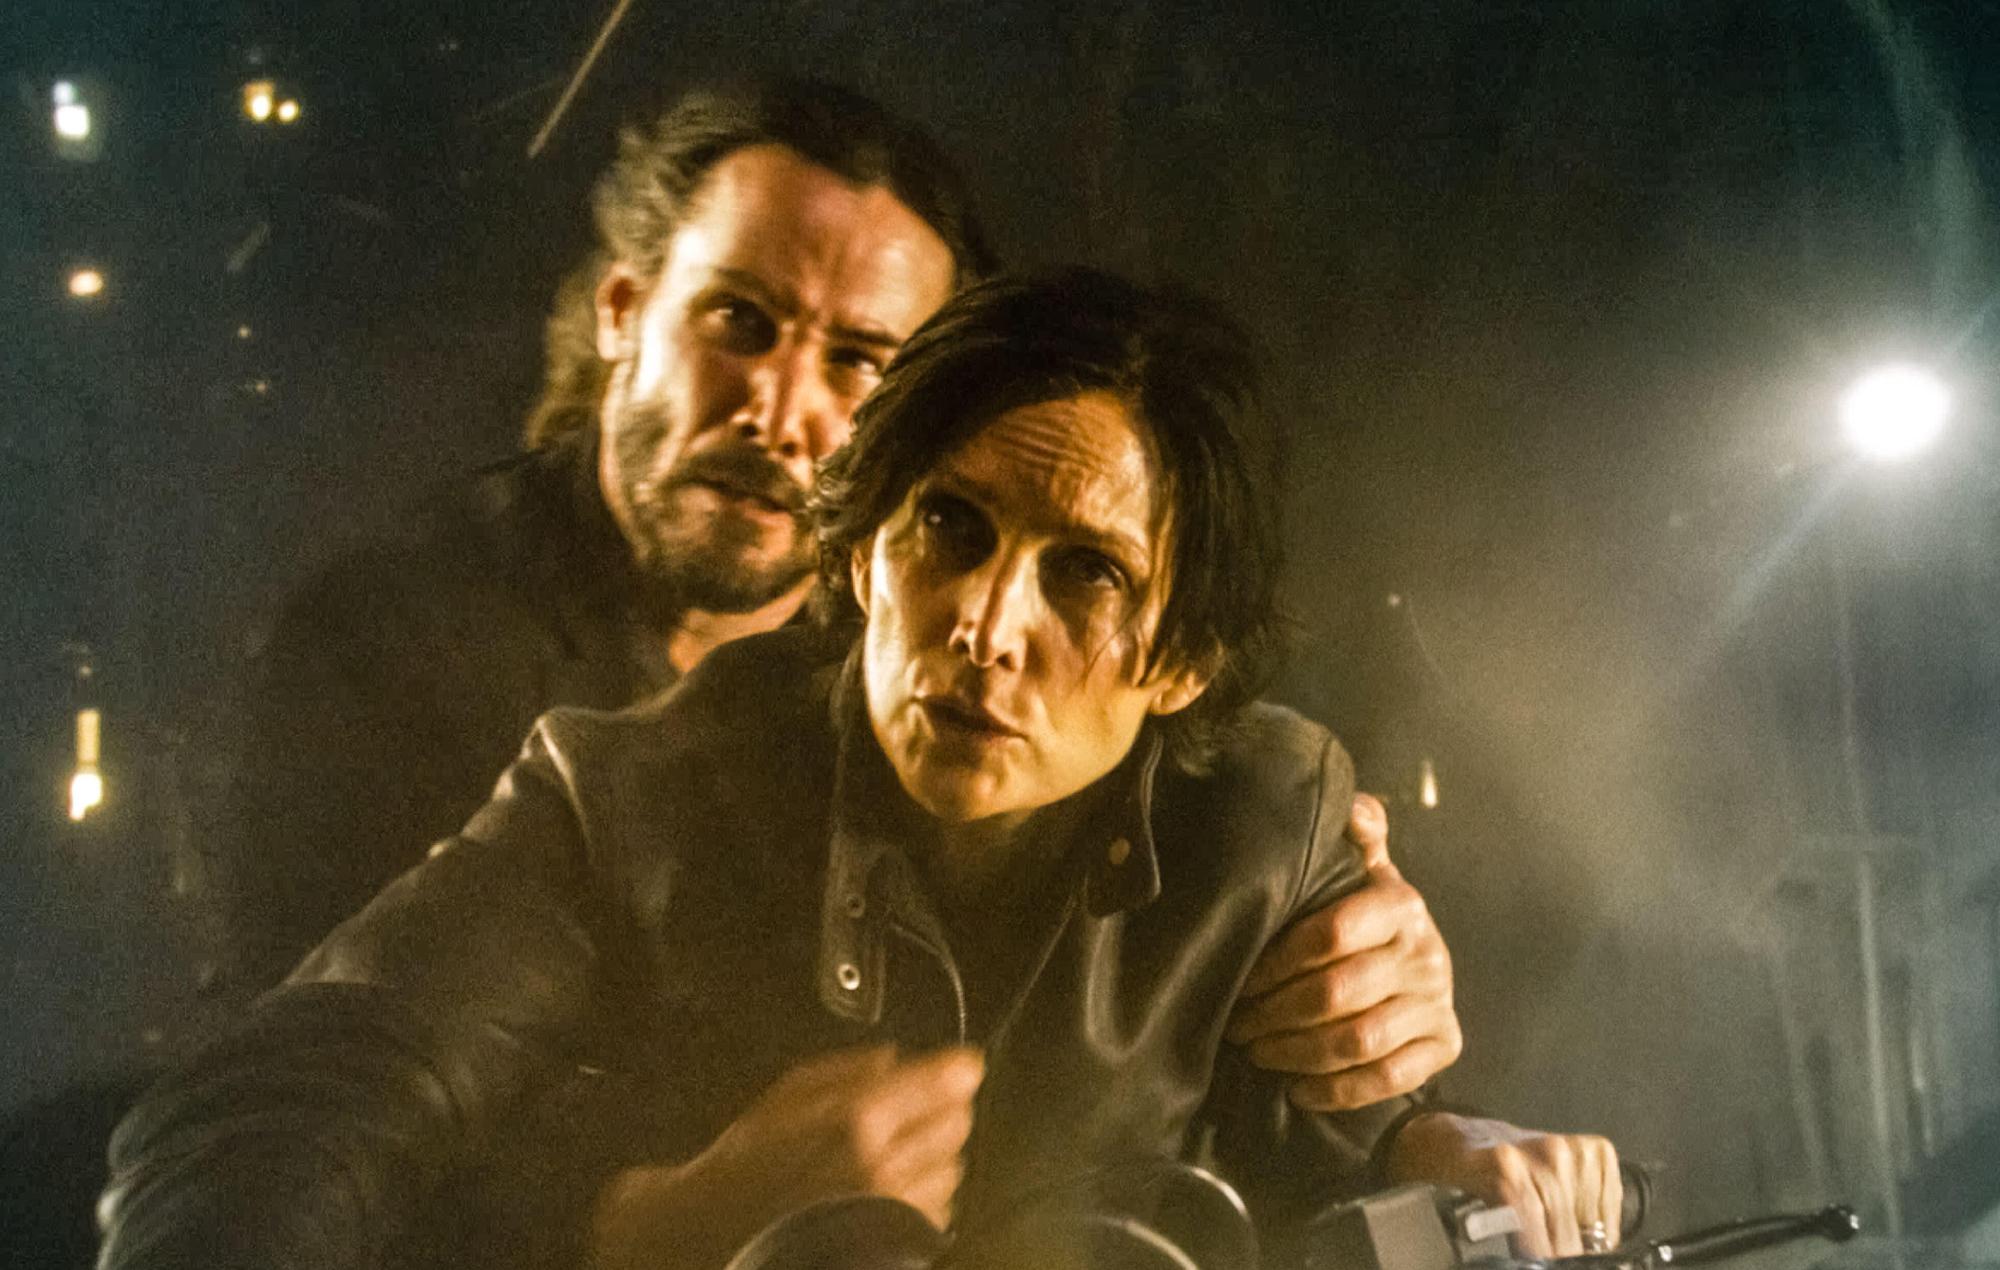 Trinity (Carrie-Anne Moss) and Neo (Keanu Reeves)